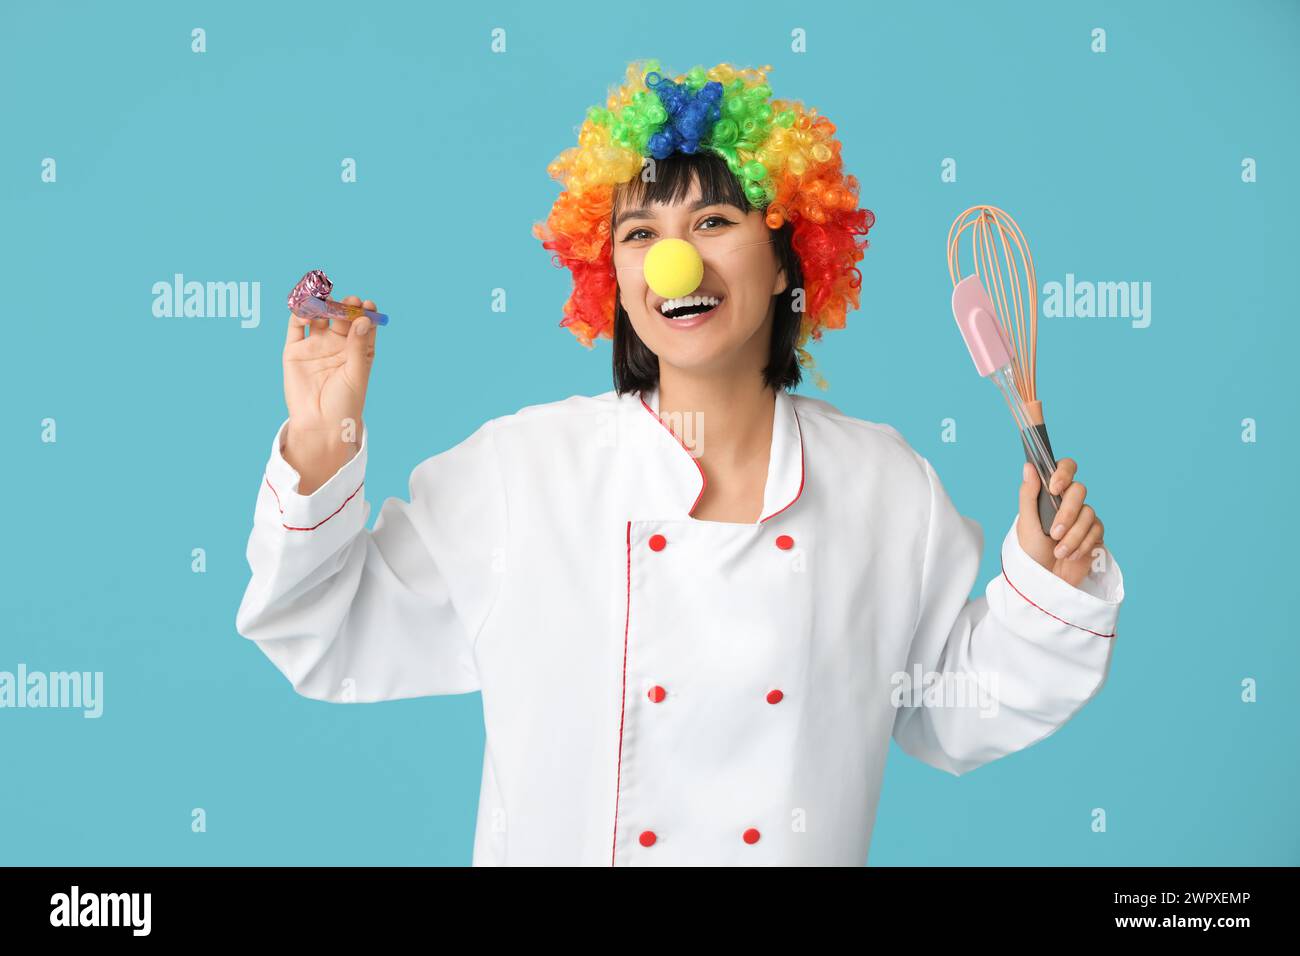 Young laughing female chef with party blower and kitchen utensils on blue background. Fool's day Stock Photo